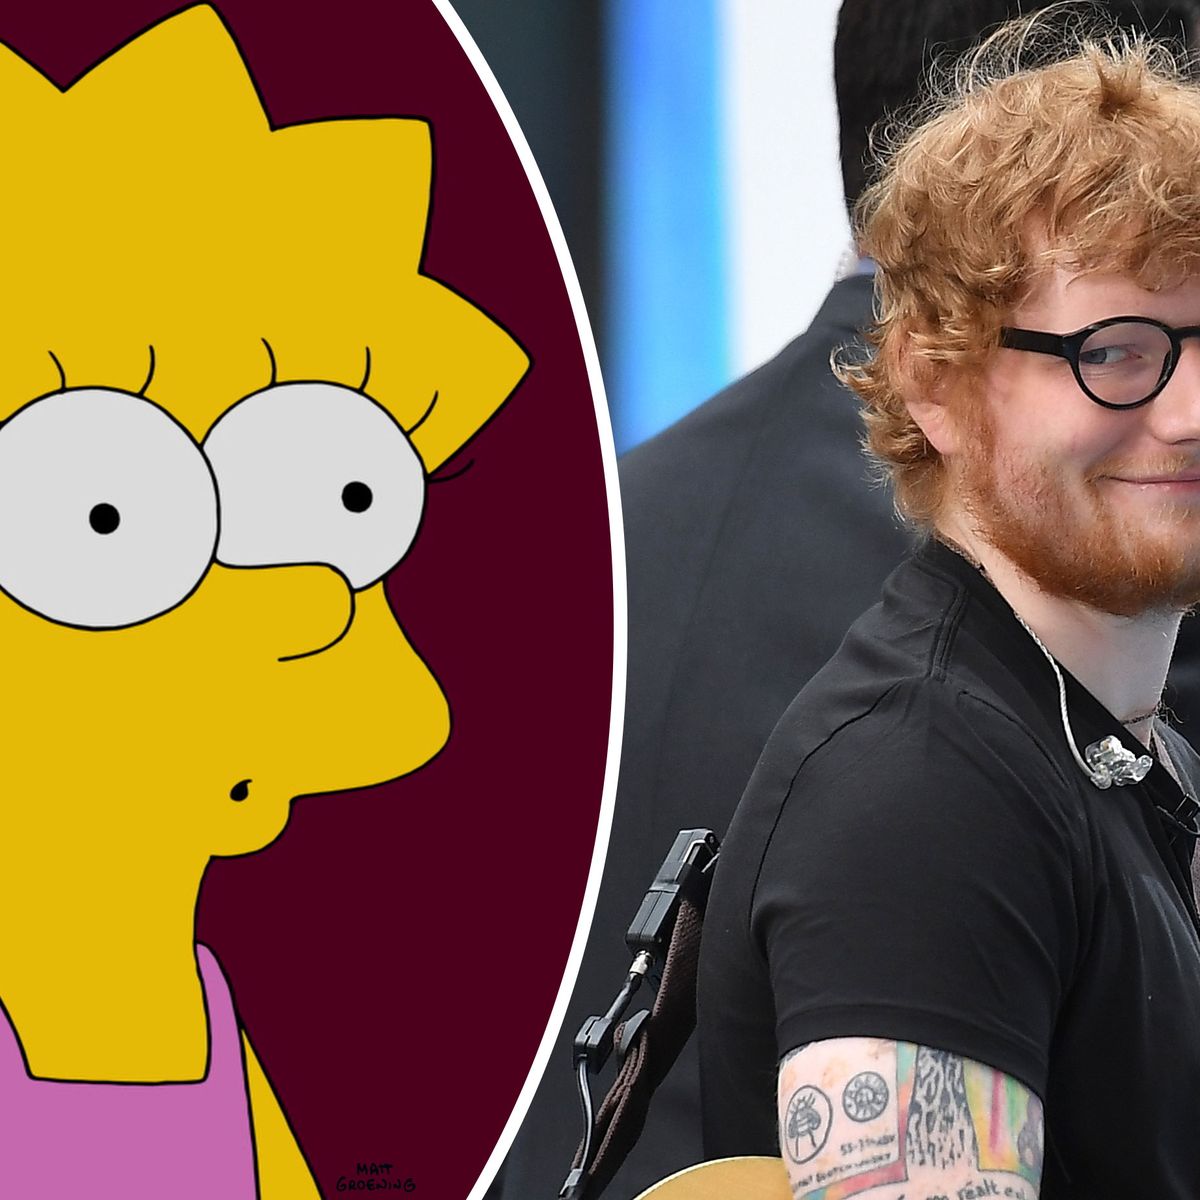 First Game of Thrones, now Ed Sheeran joins Simpsons